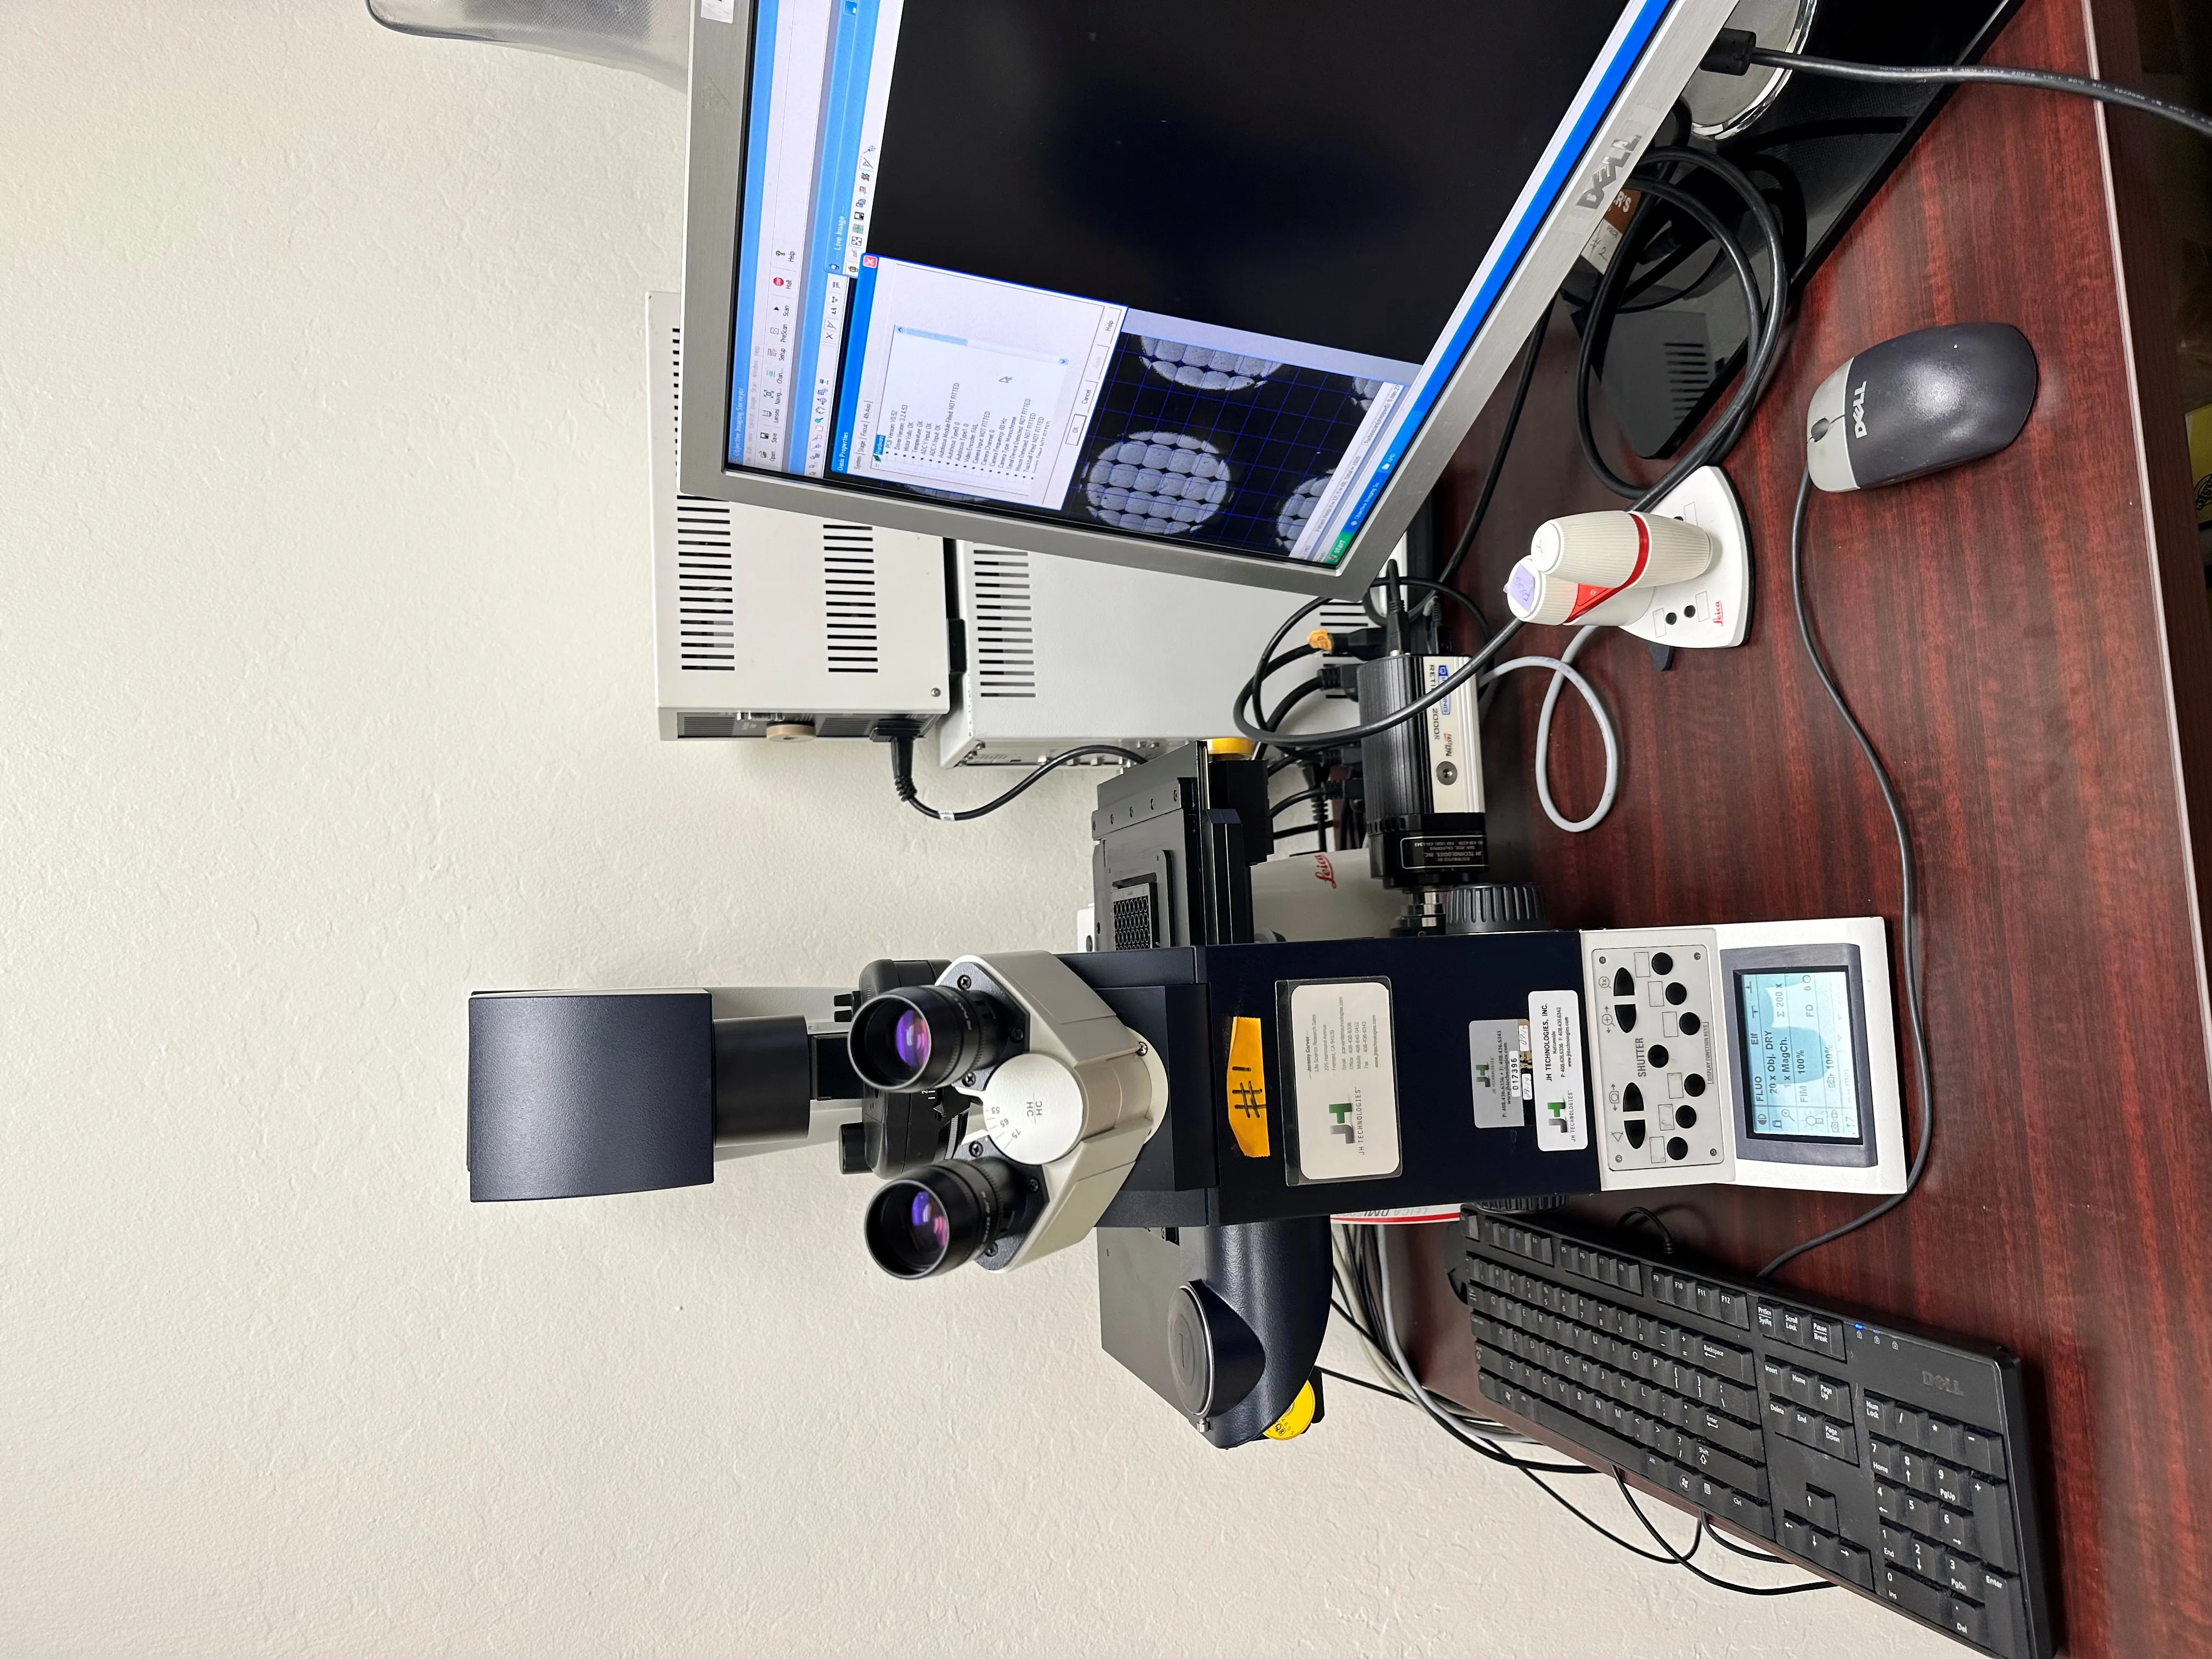 Leica DMI6000 B Fully Automated Inverted Research Microscope for Biomedical Research